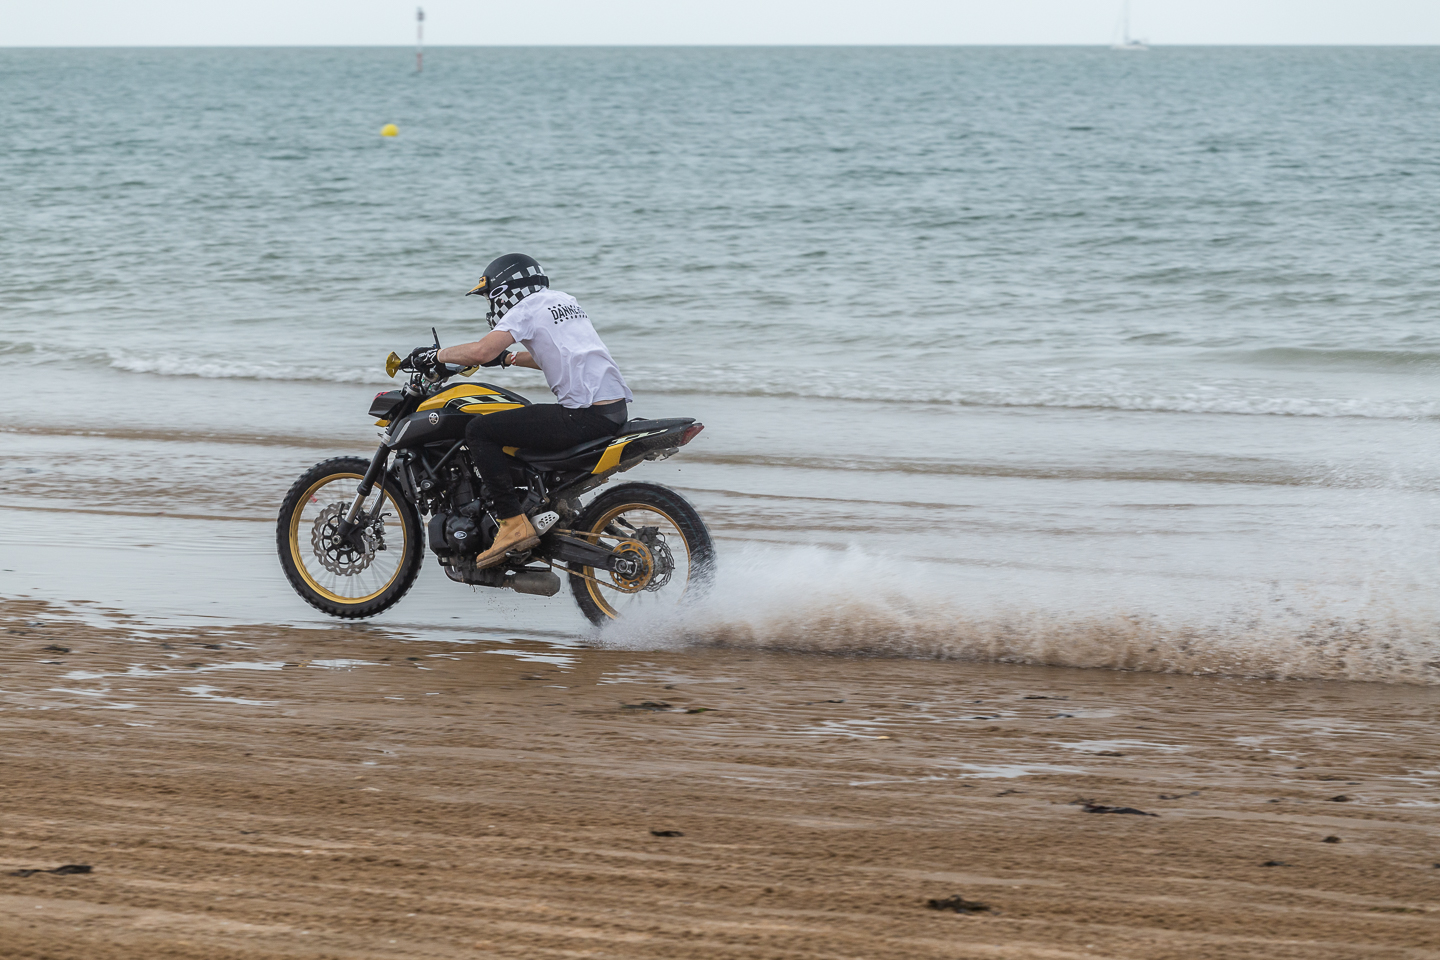 Motorcycle riding through the sea waves